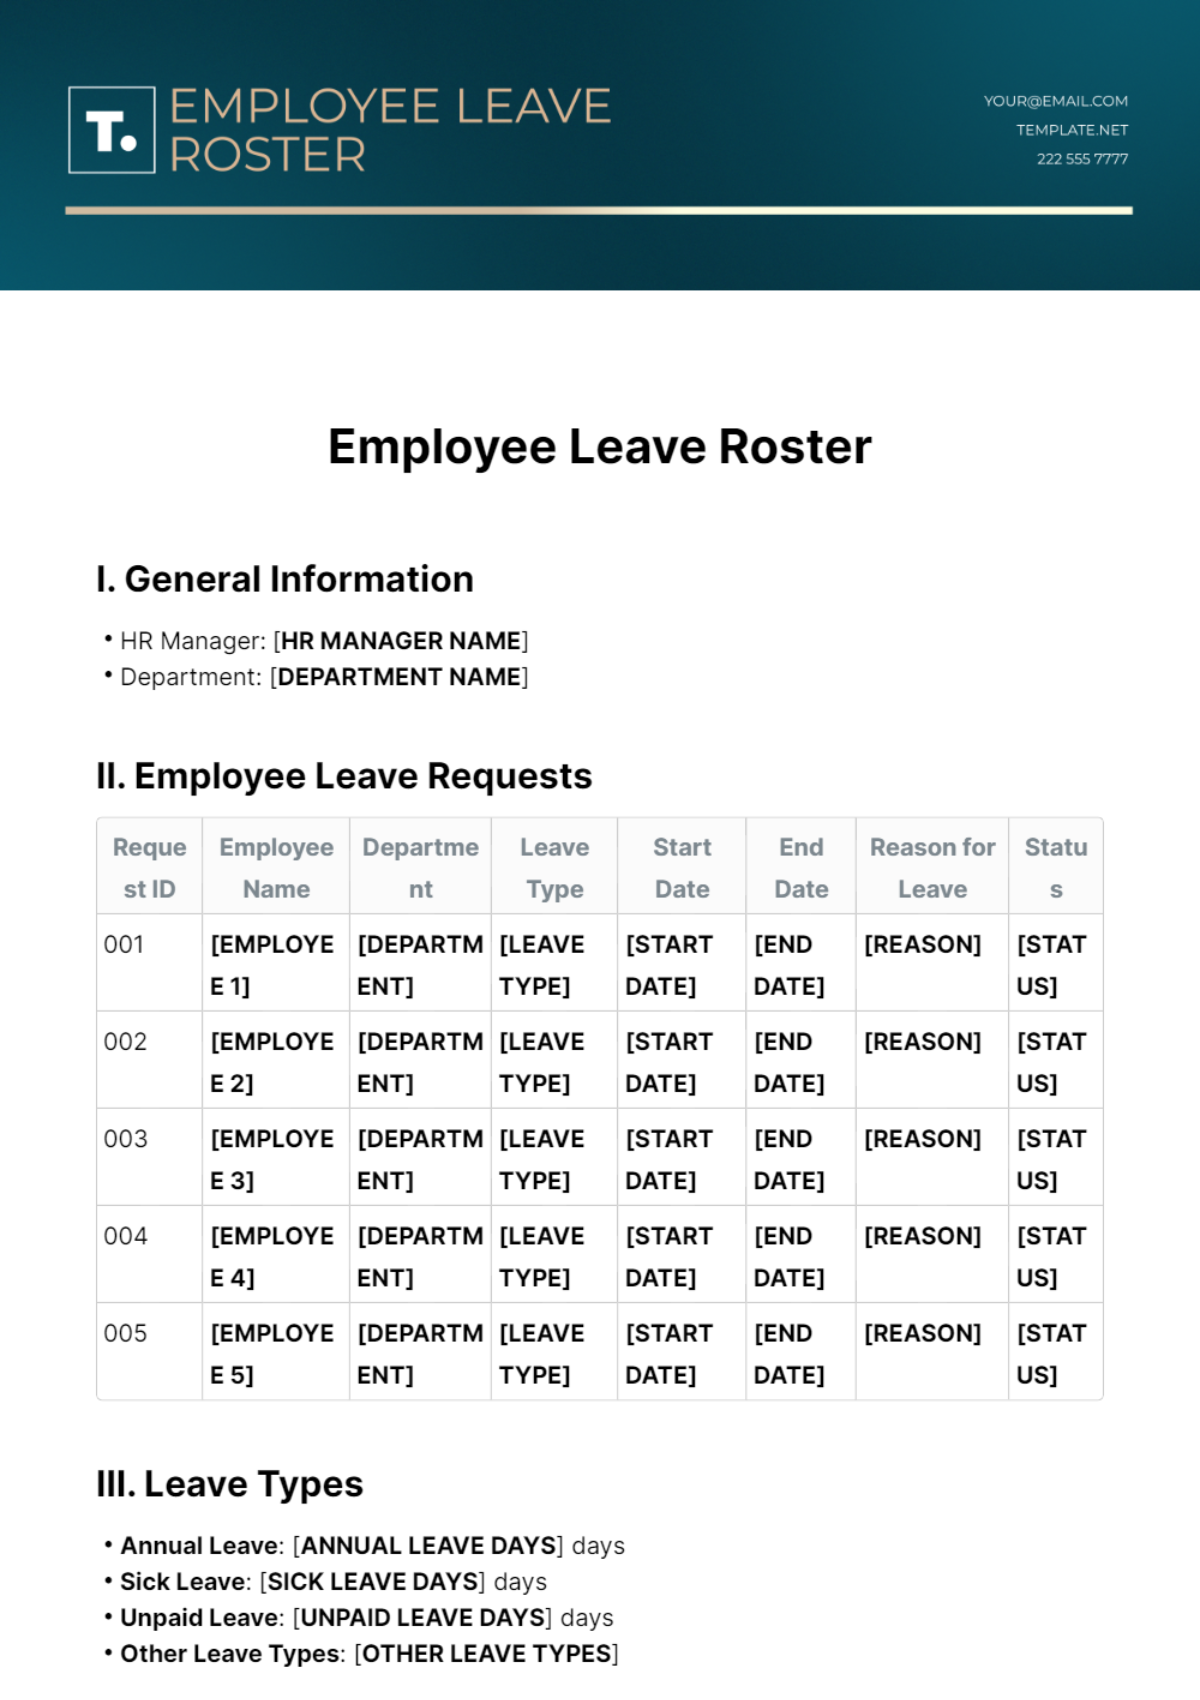 Employee Leave Roster Template